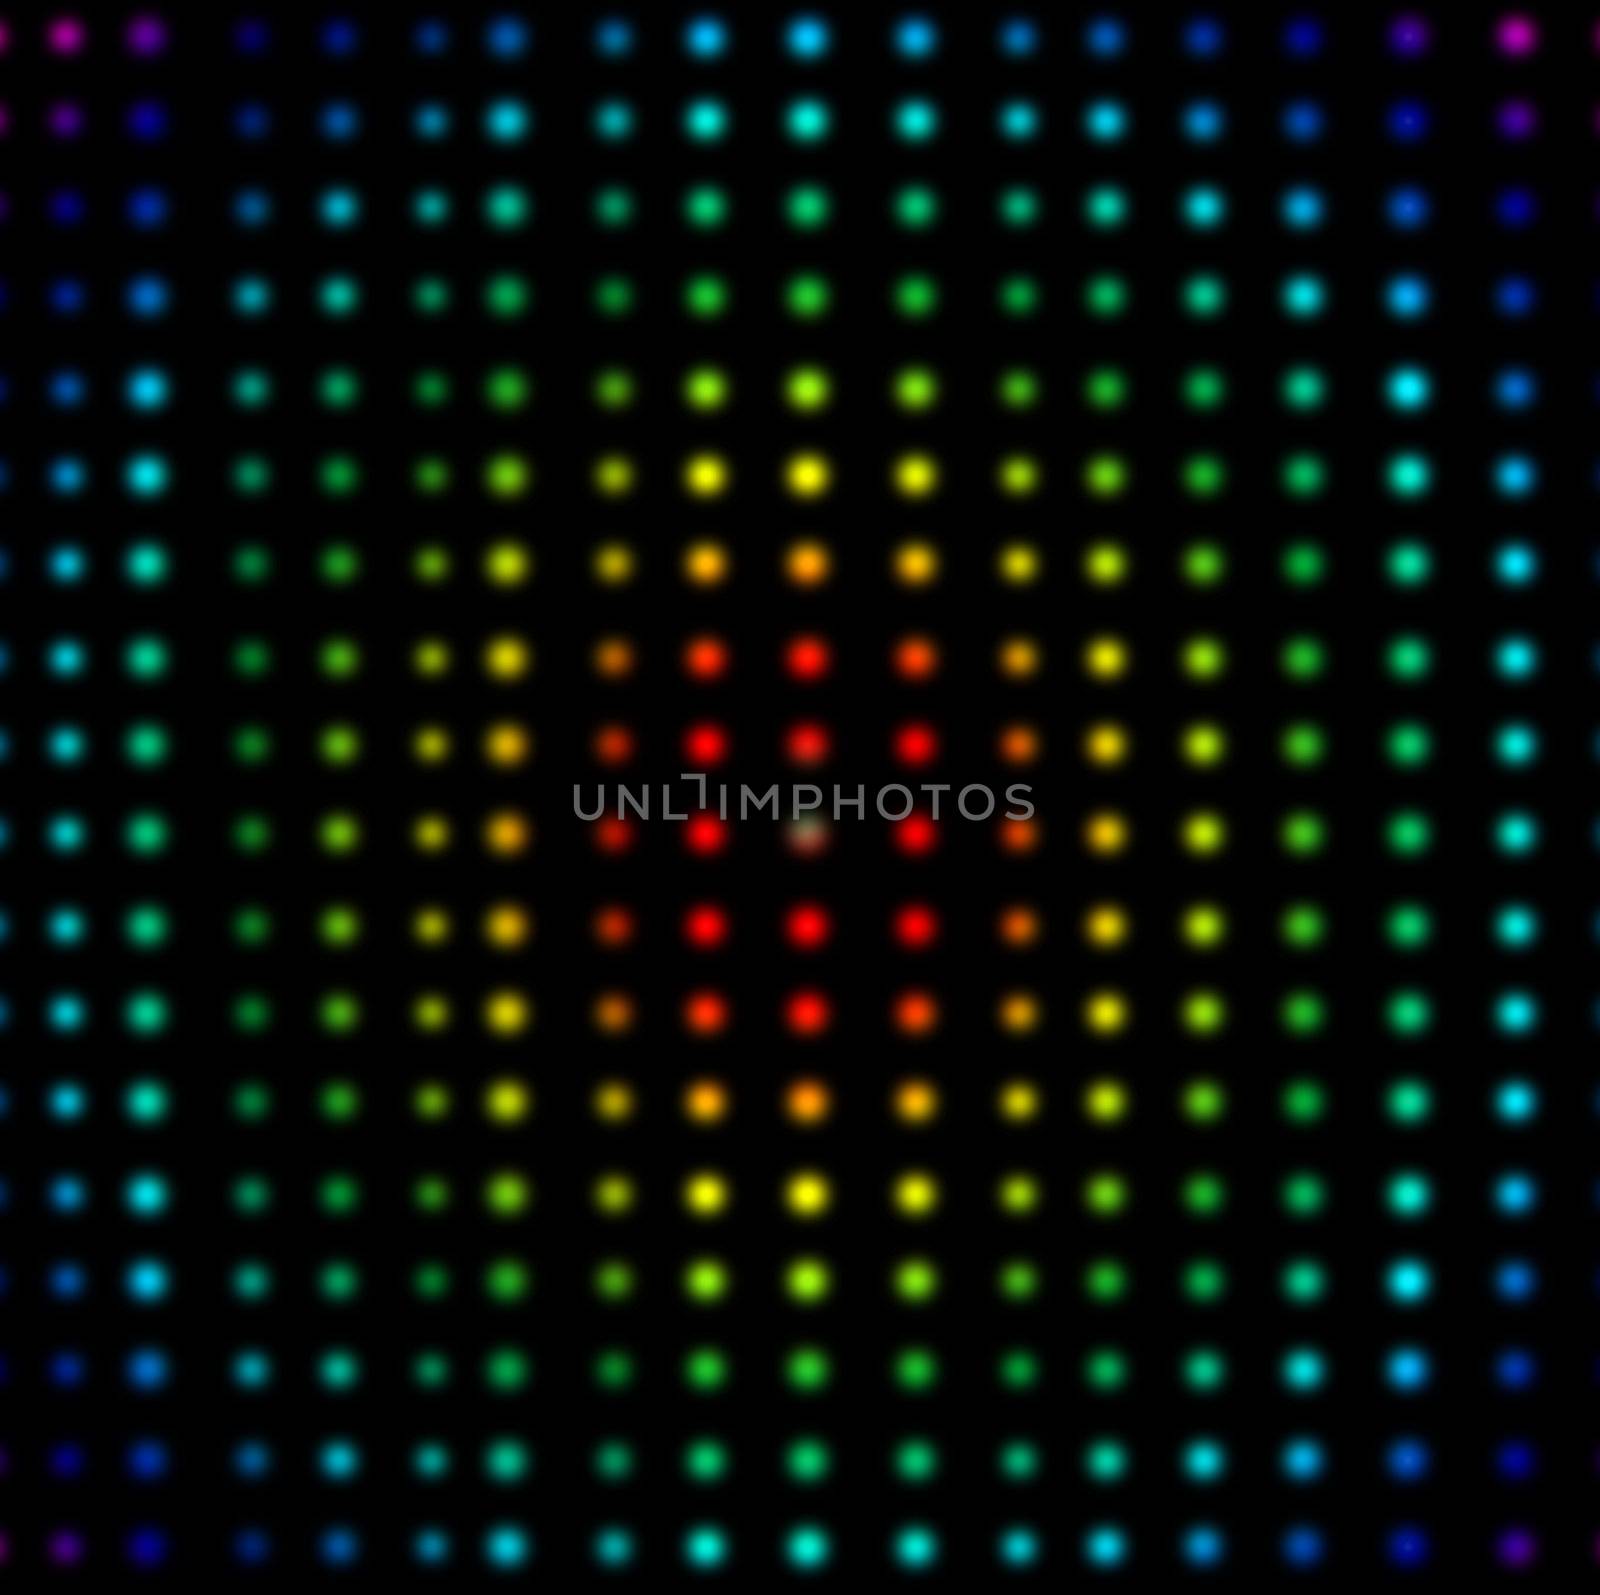 Multicolored dots placed in lines by Wavebreakmedia